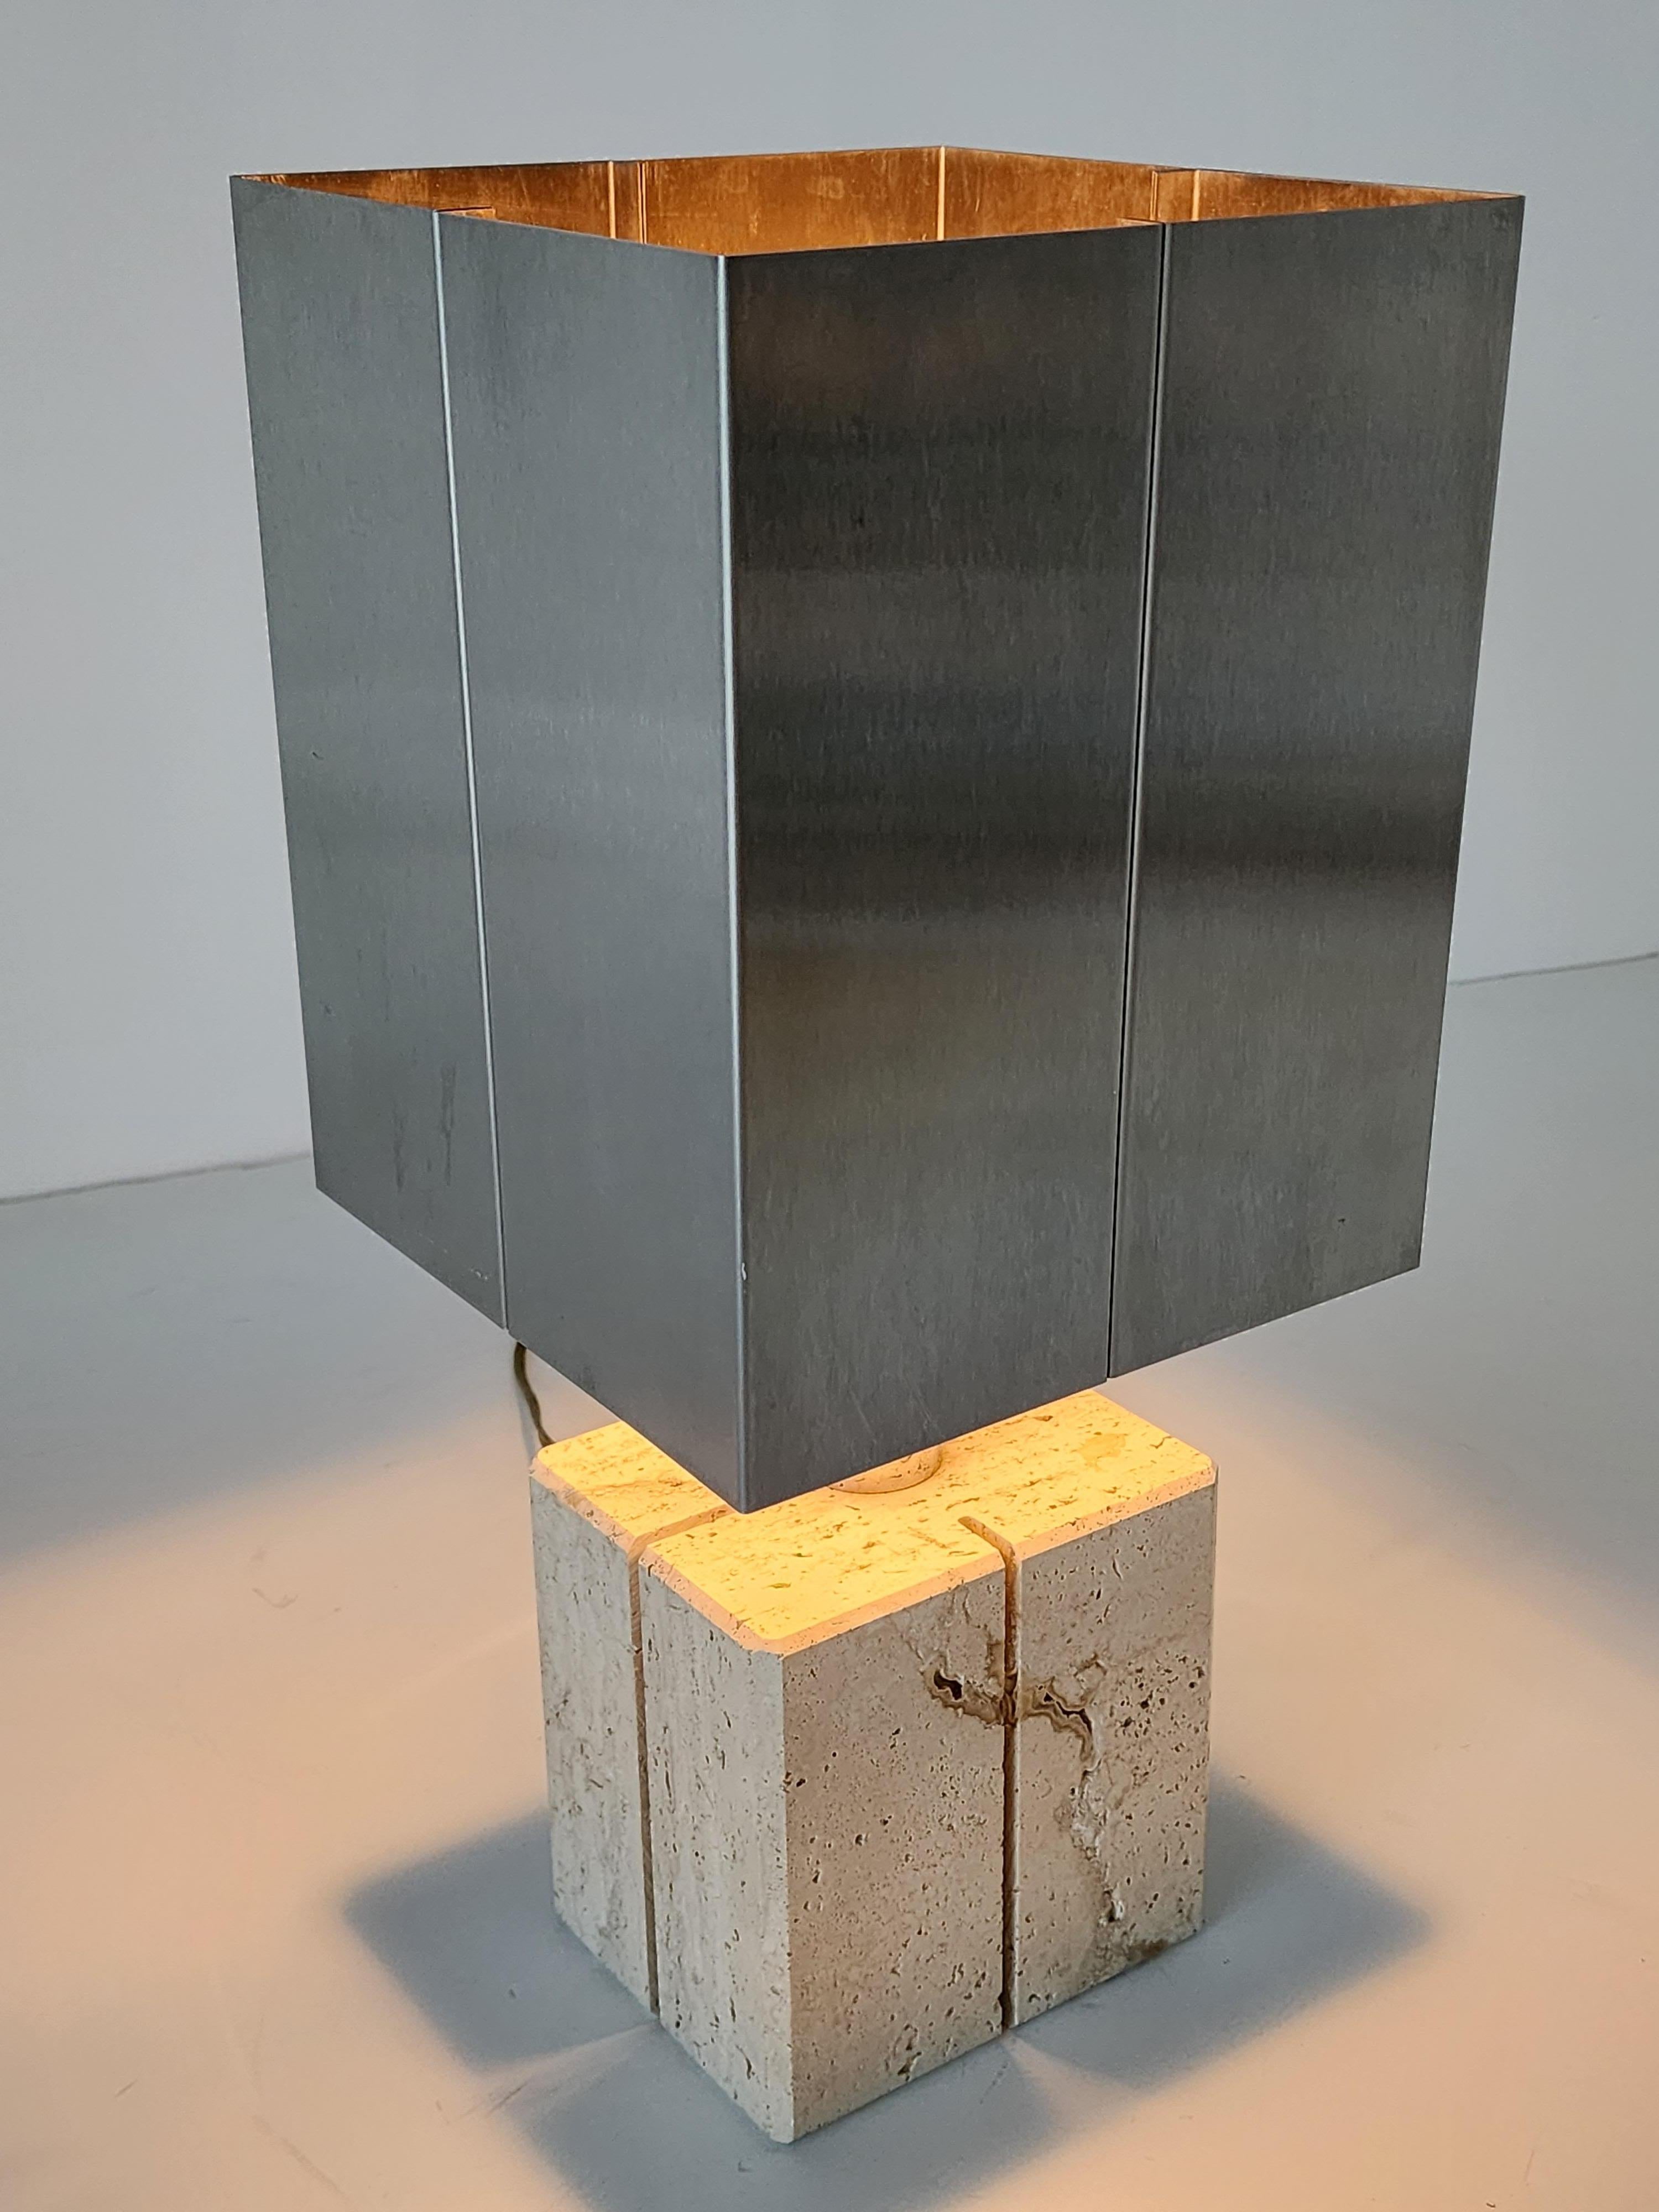 Travertine table lamp with  stainless steel shade from Reggiani Lighting , Italy .  

Contain one Regular E26 size socket rated at 60 watt . 

On/Off Switch on socket . 

Travertine base measure 6 in. wide  by 6 in . high . by 5 in. deep . 

In very